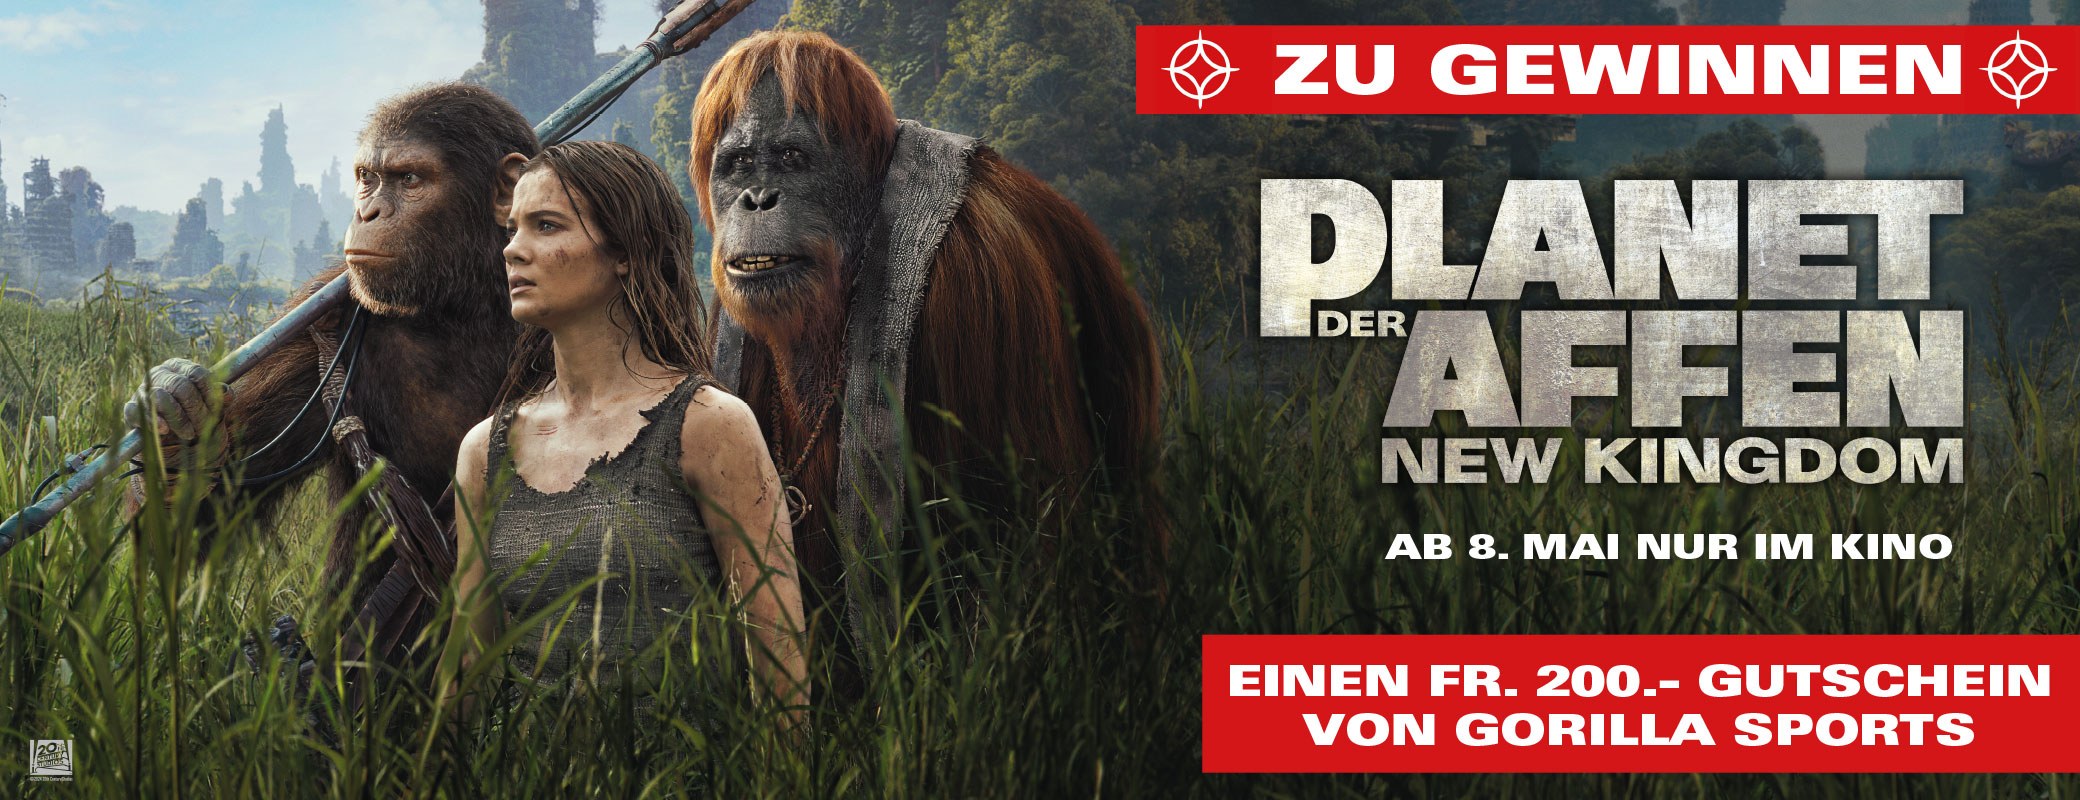 Promotional image for 'Planet of the Apes: New Kingdom' featuring two apes and a human in a lush forest setting.